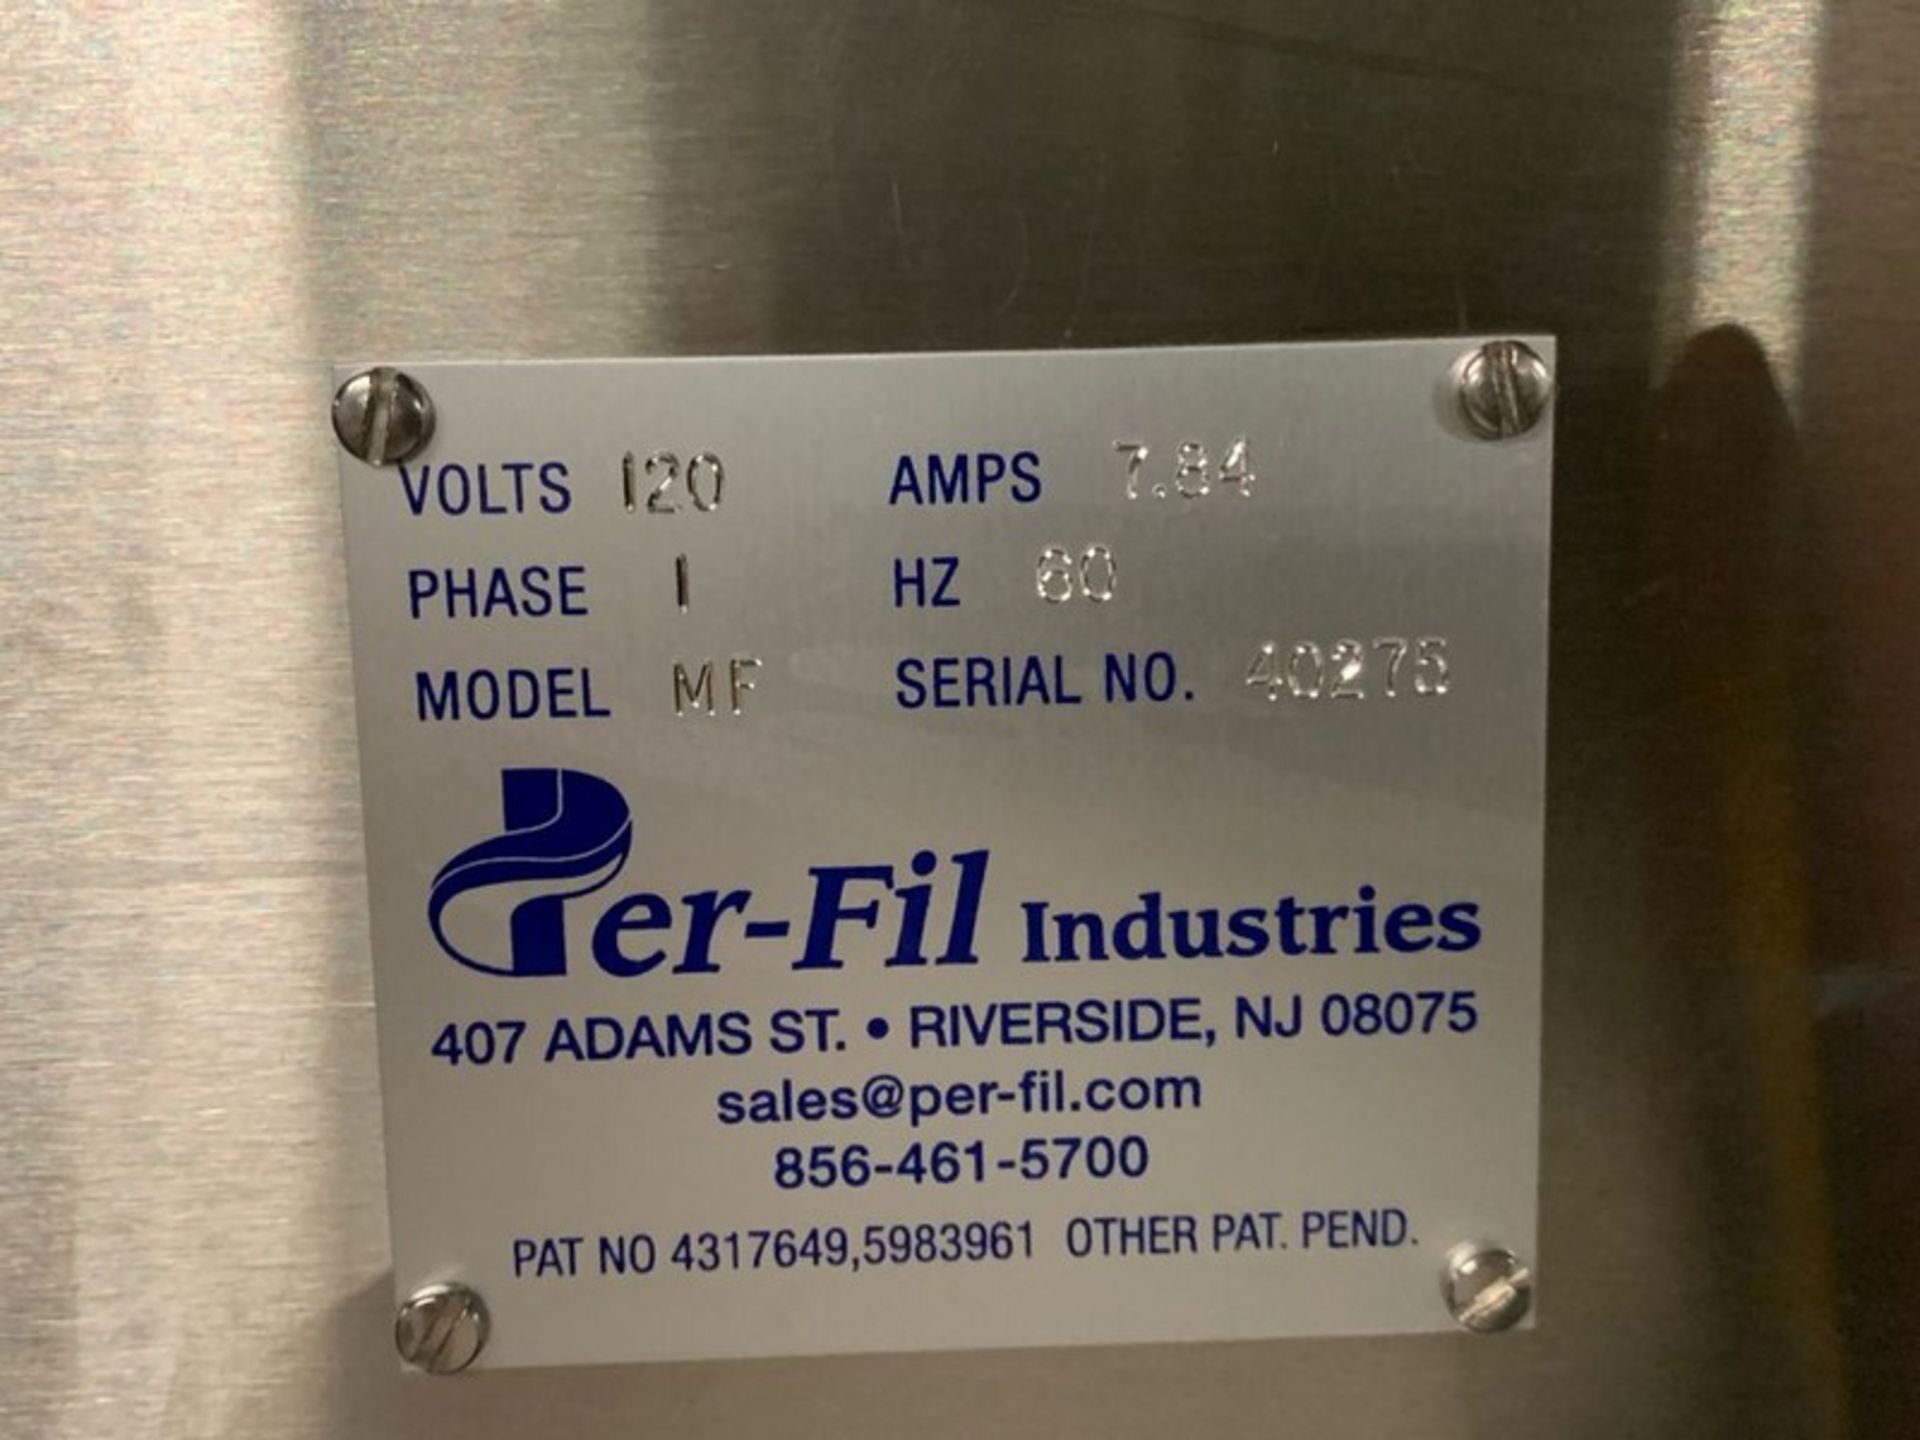 PerFil Semi-Automatic Powder Filler. Model MF, Serial: 40275, 120 Volts, 1 Phase, 60 Hz. As shown in - Image 7 of 7